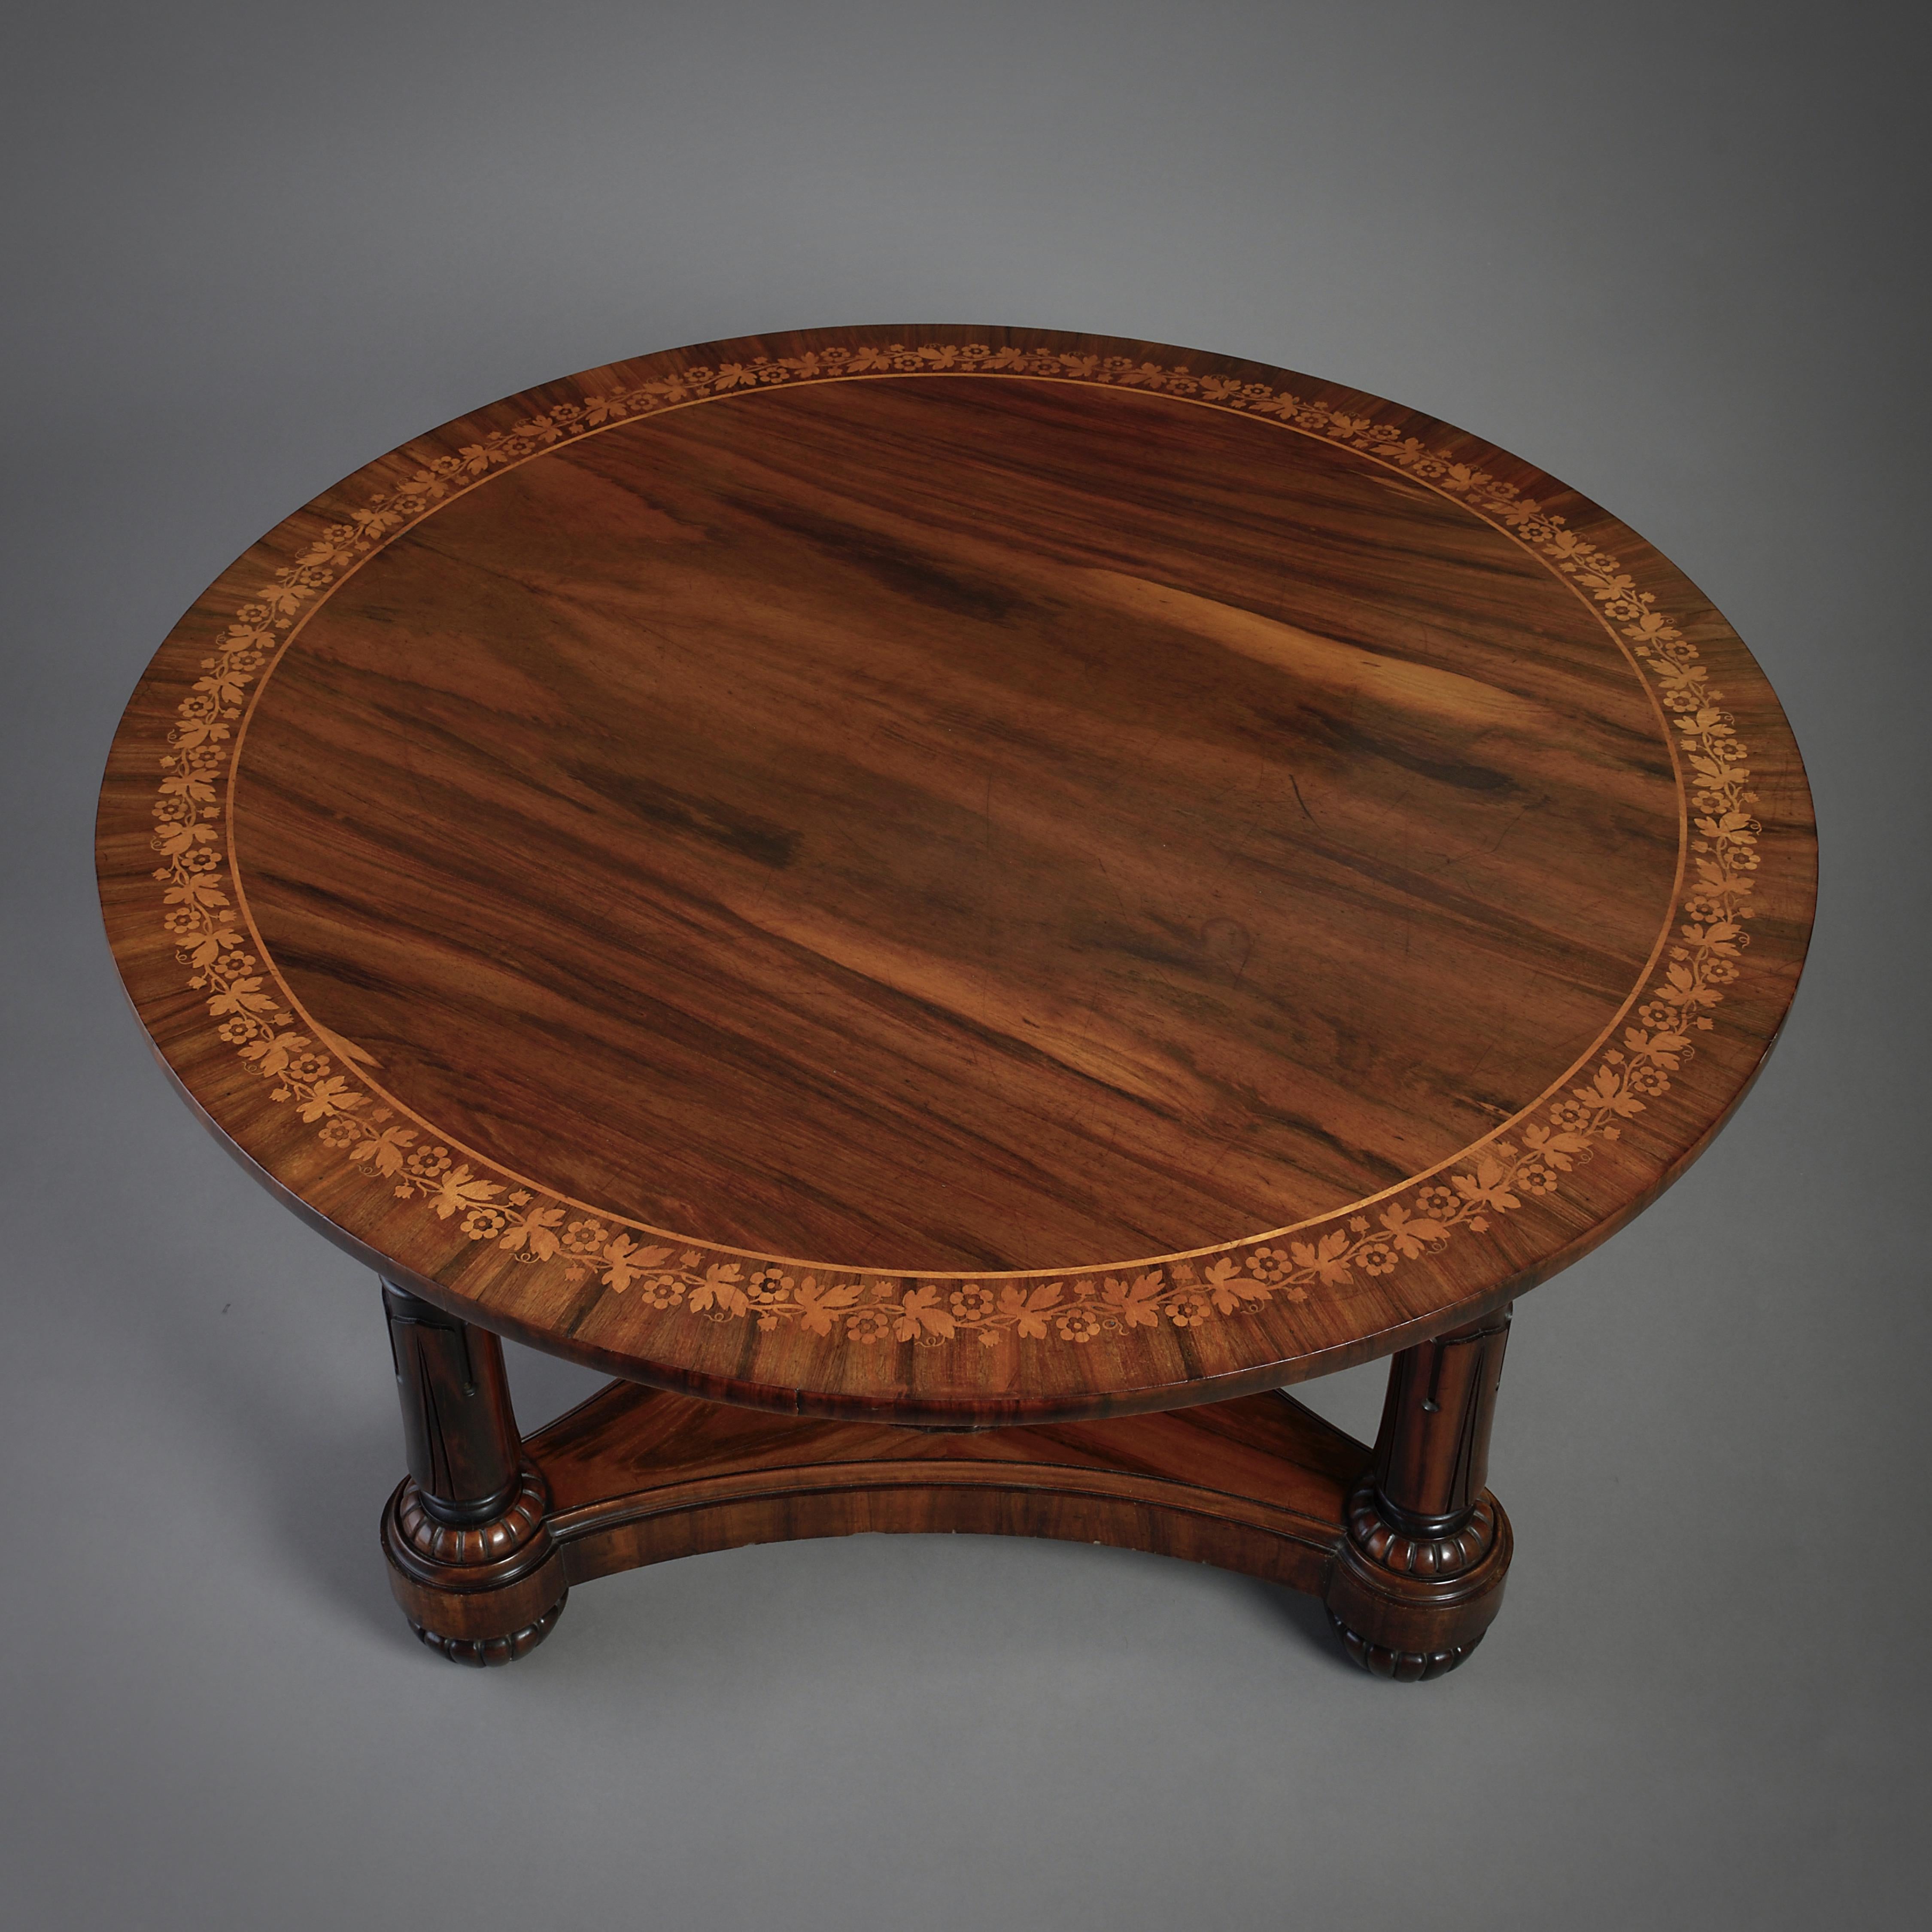 Regency Goncalo Alves Centre Table In Good Condition For Sale In London, GB